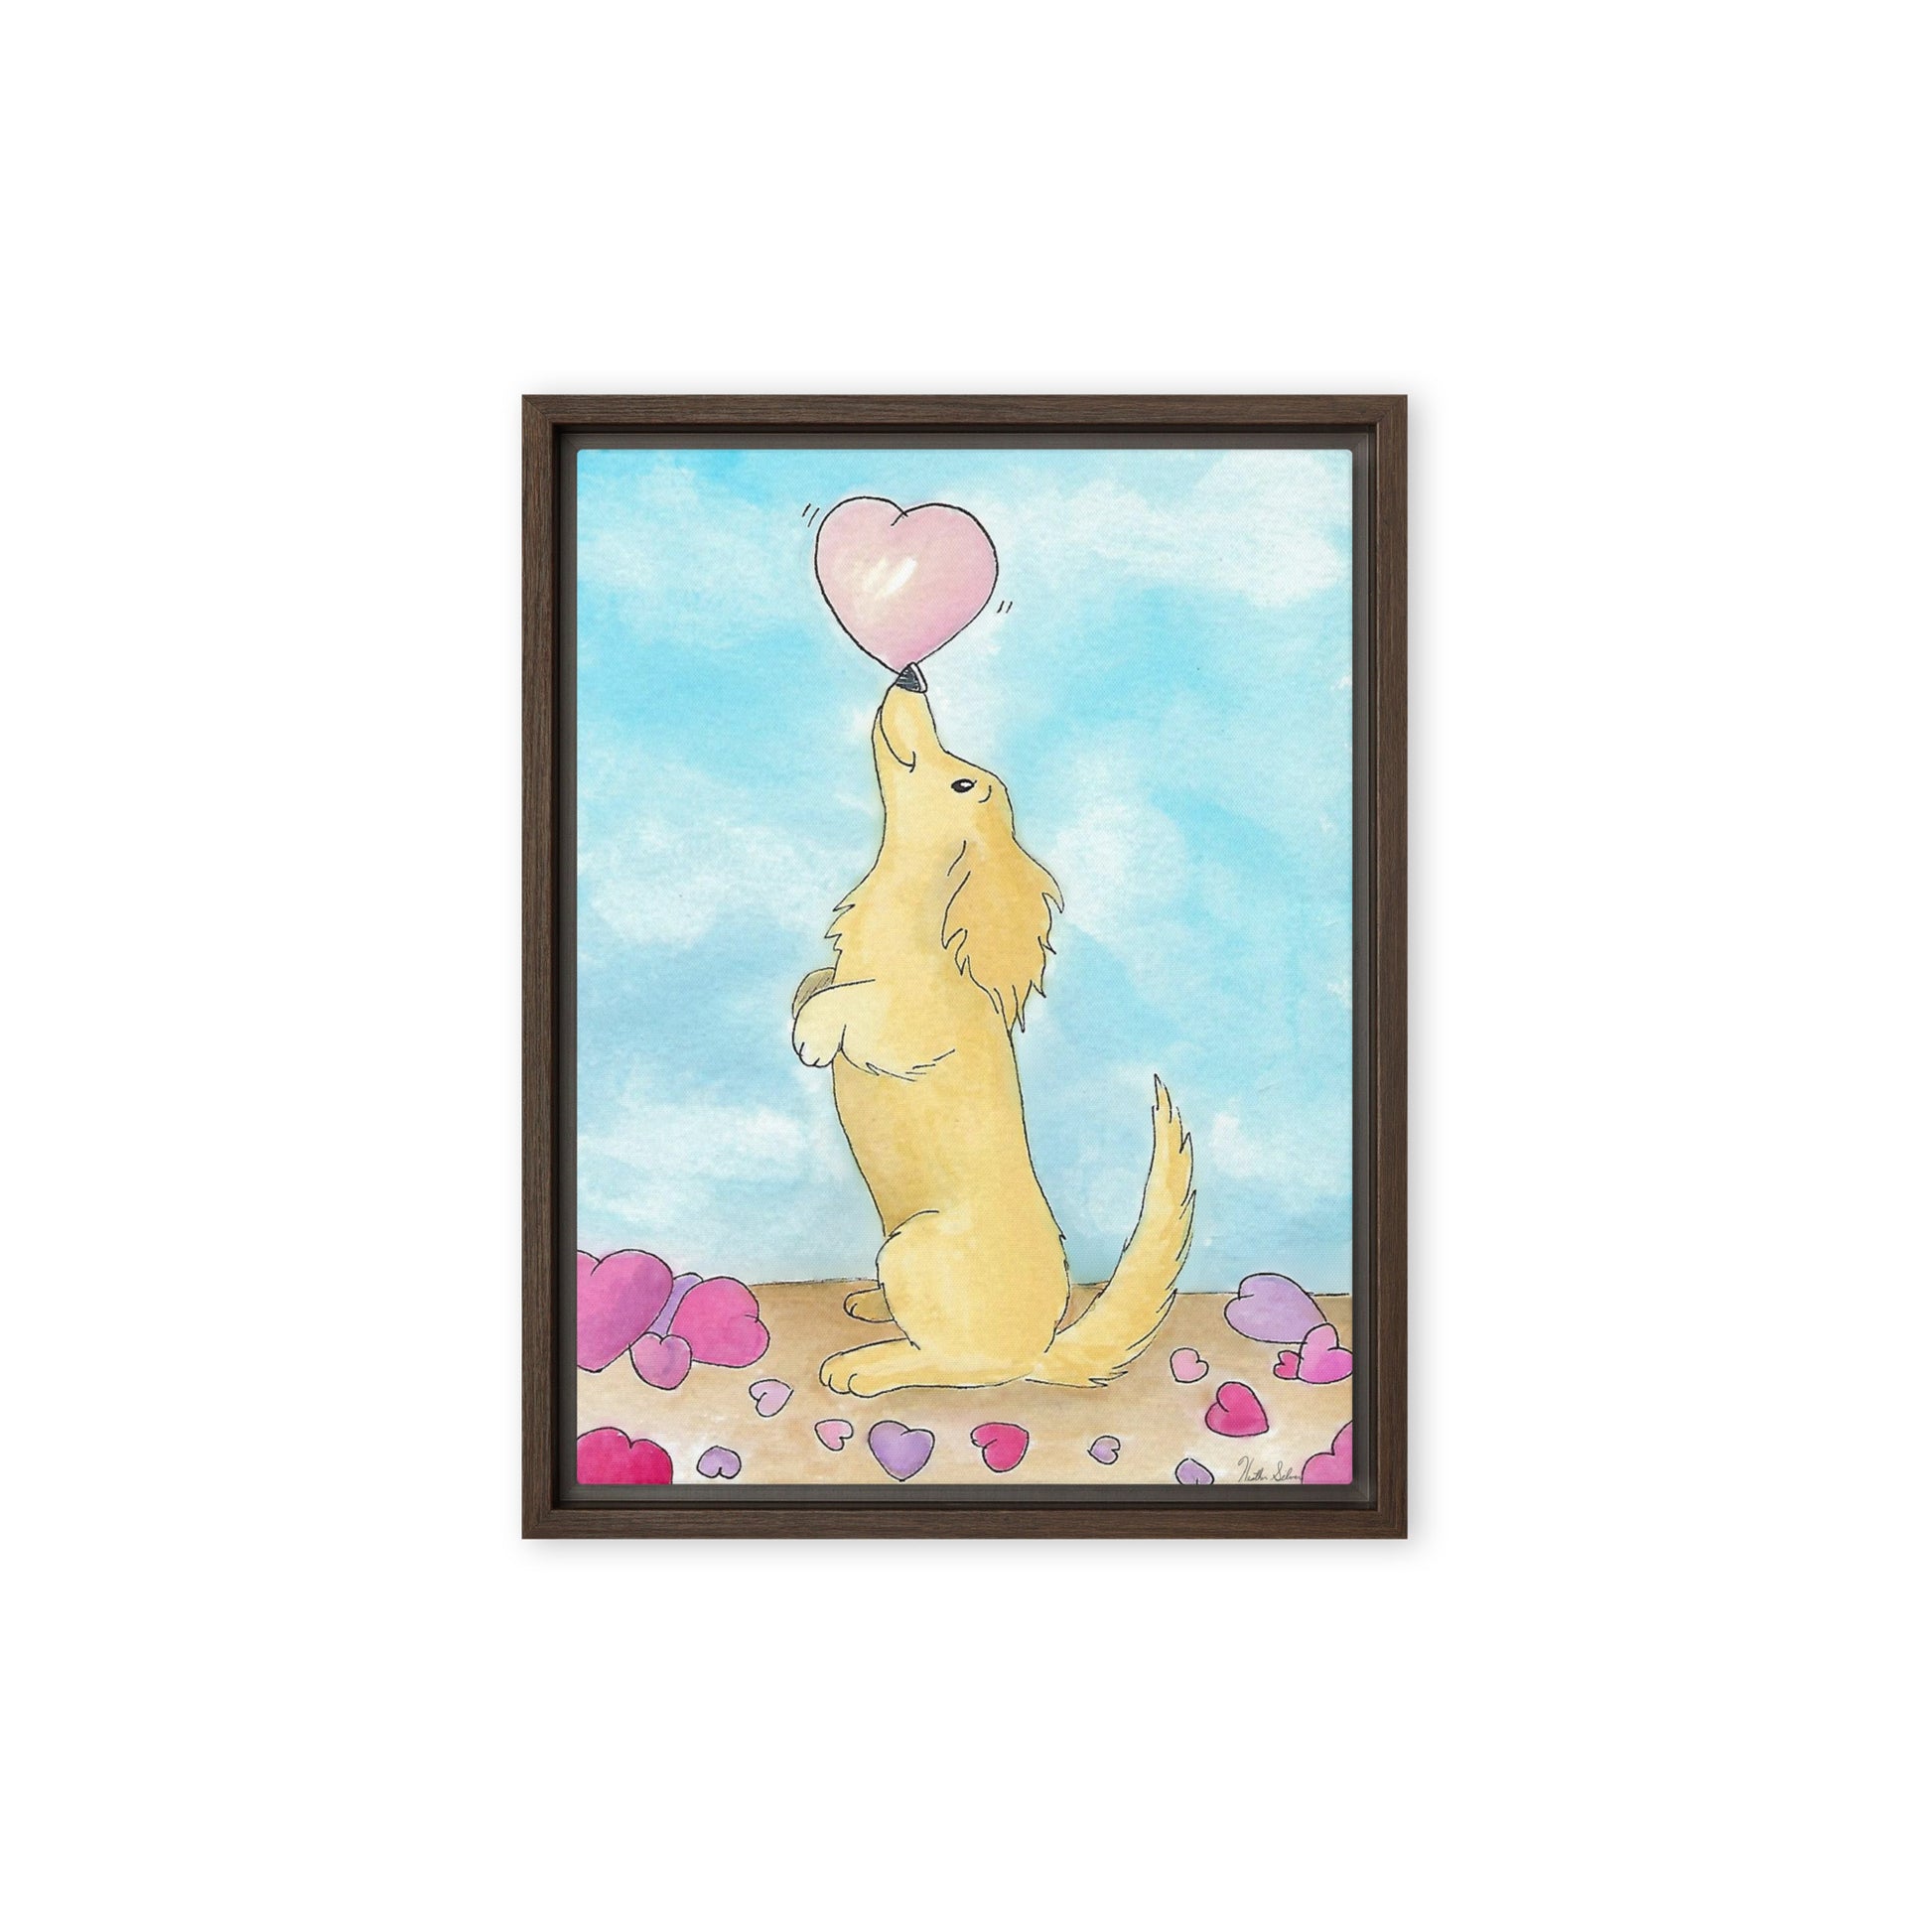 9 by 12 inch framed canvas Puppy Love print. The canvas is in a brown pine wood frame.